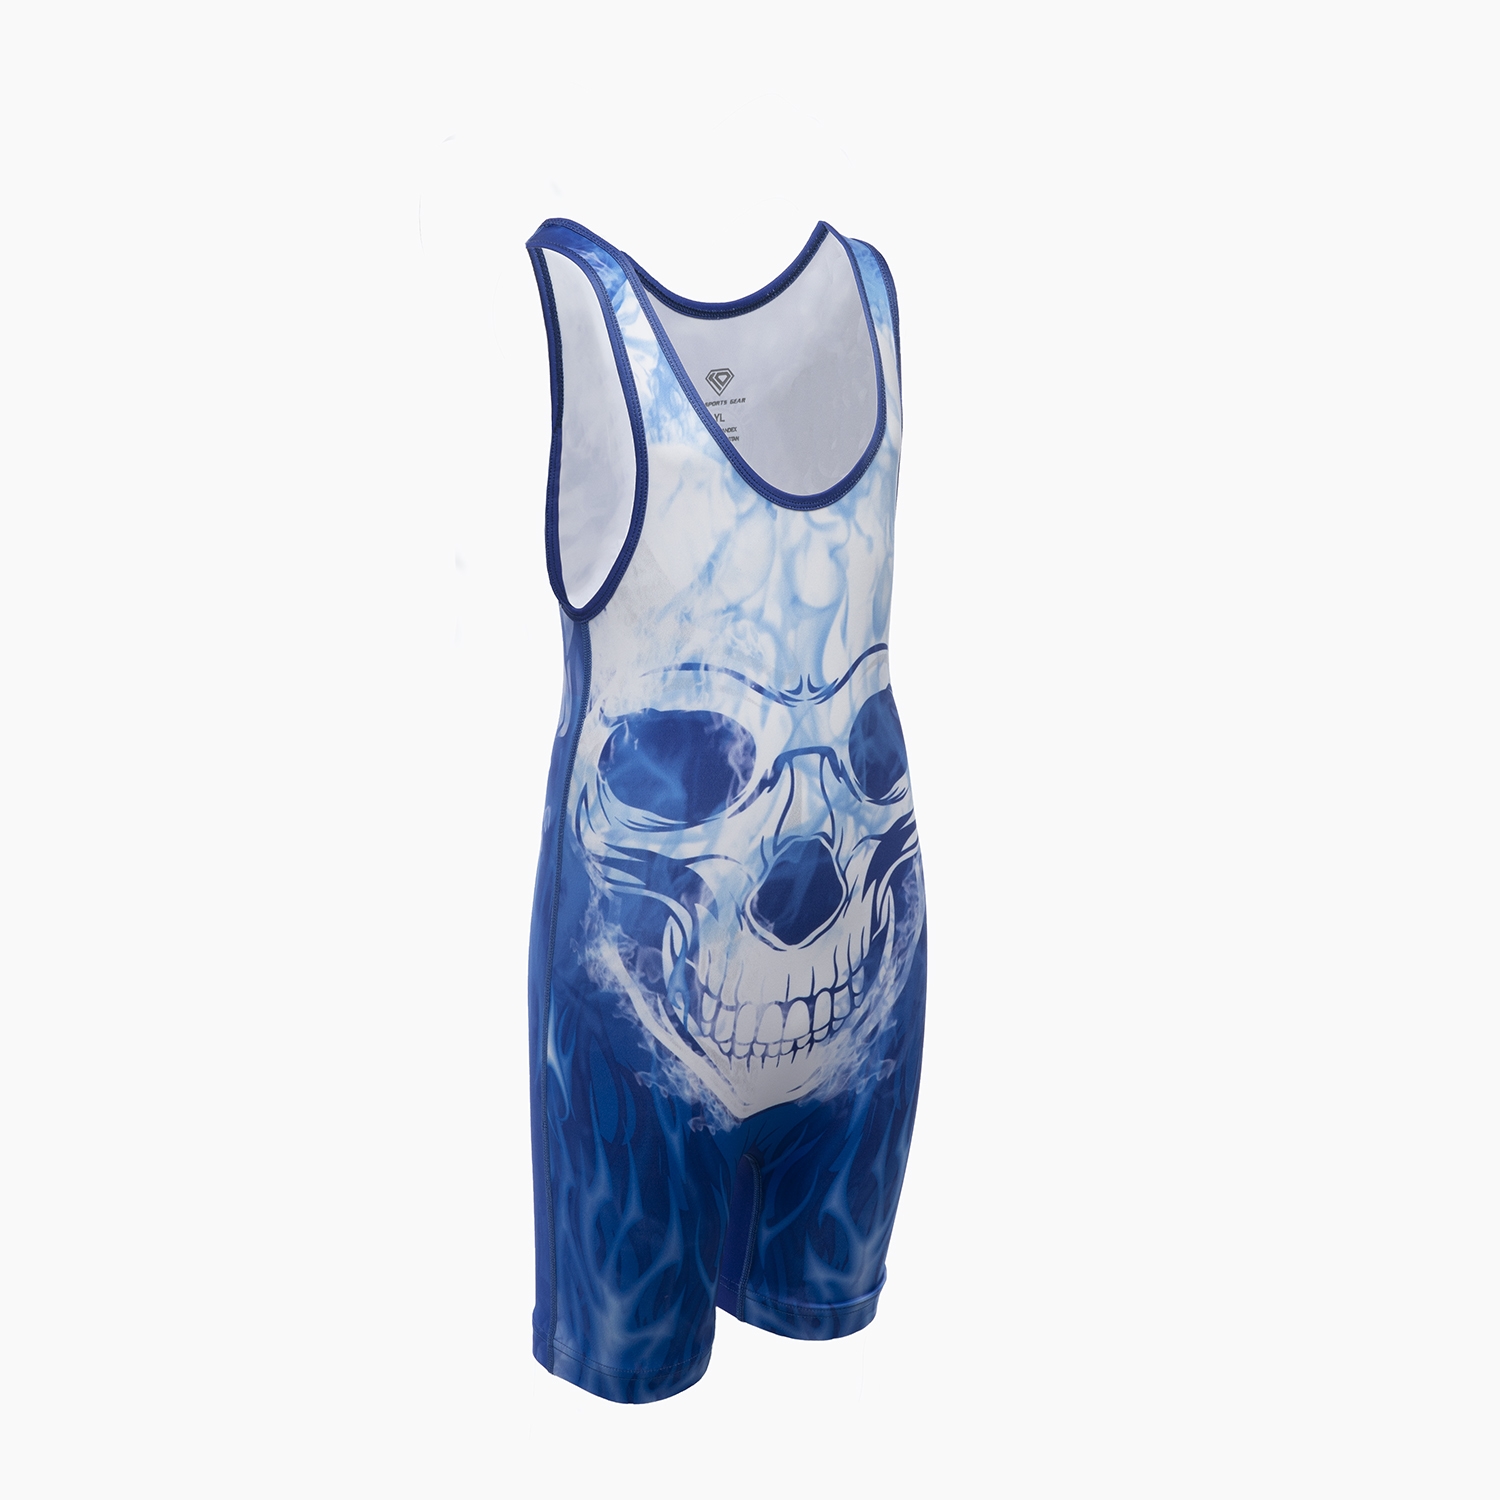 Wrestling Singlet by KO Sports Gear SILVER AND BLACK SKULL CLOSEOUT 